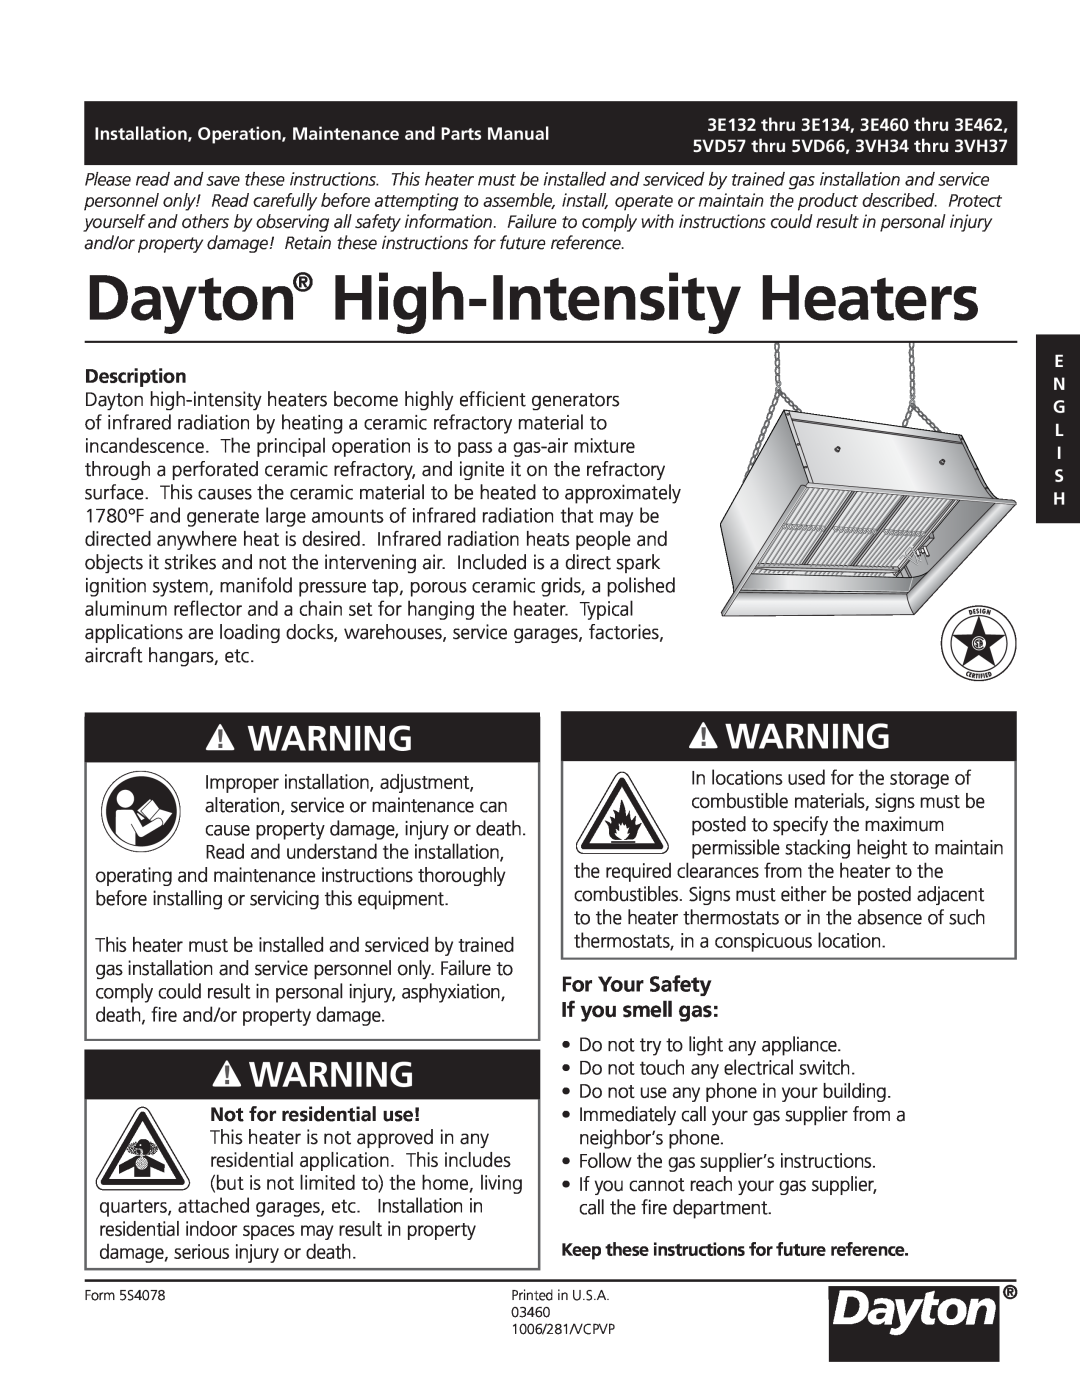 Dayton 3VH37 manual For Your Safety If you smell gas, Dayton High-IntensityHeaters, Description, Not for residential use 